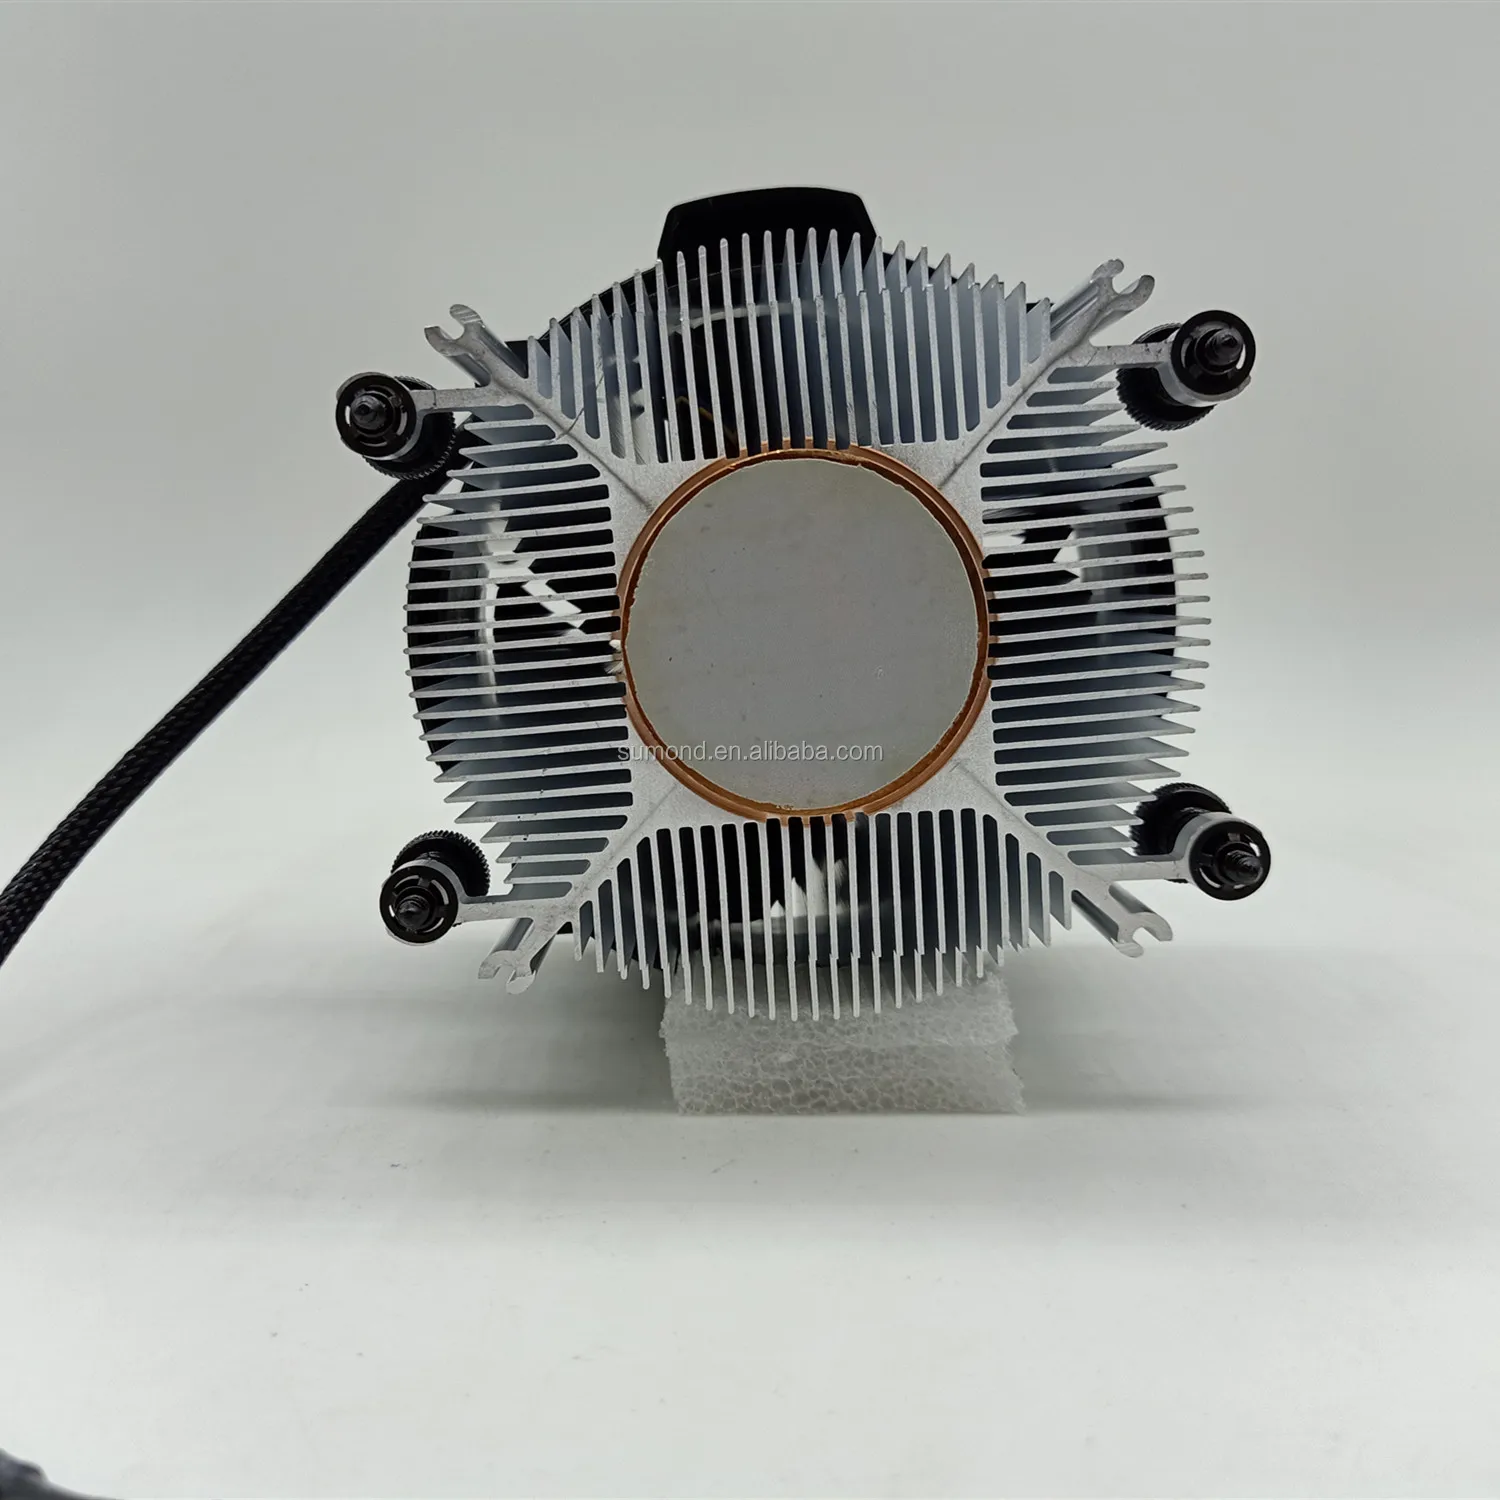 Wraith Spire Cooler For Ryzen 5 3600x 3400g 2600x 1600 1500x - Buy Cooling  Fan,Air Cooler,Cpu Cooler Product on Alibaba.com